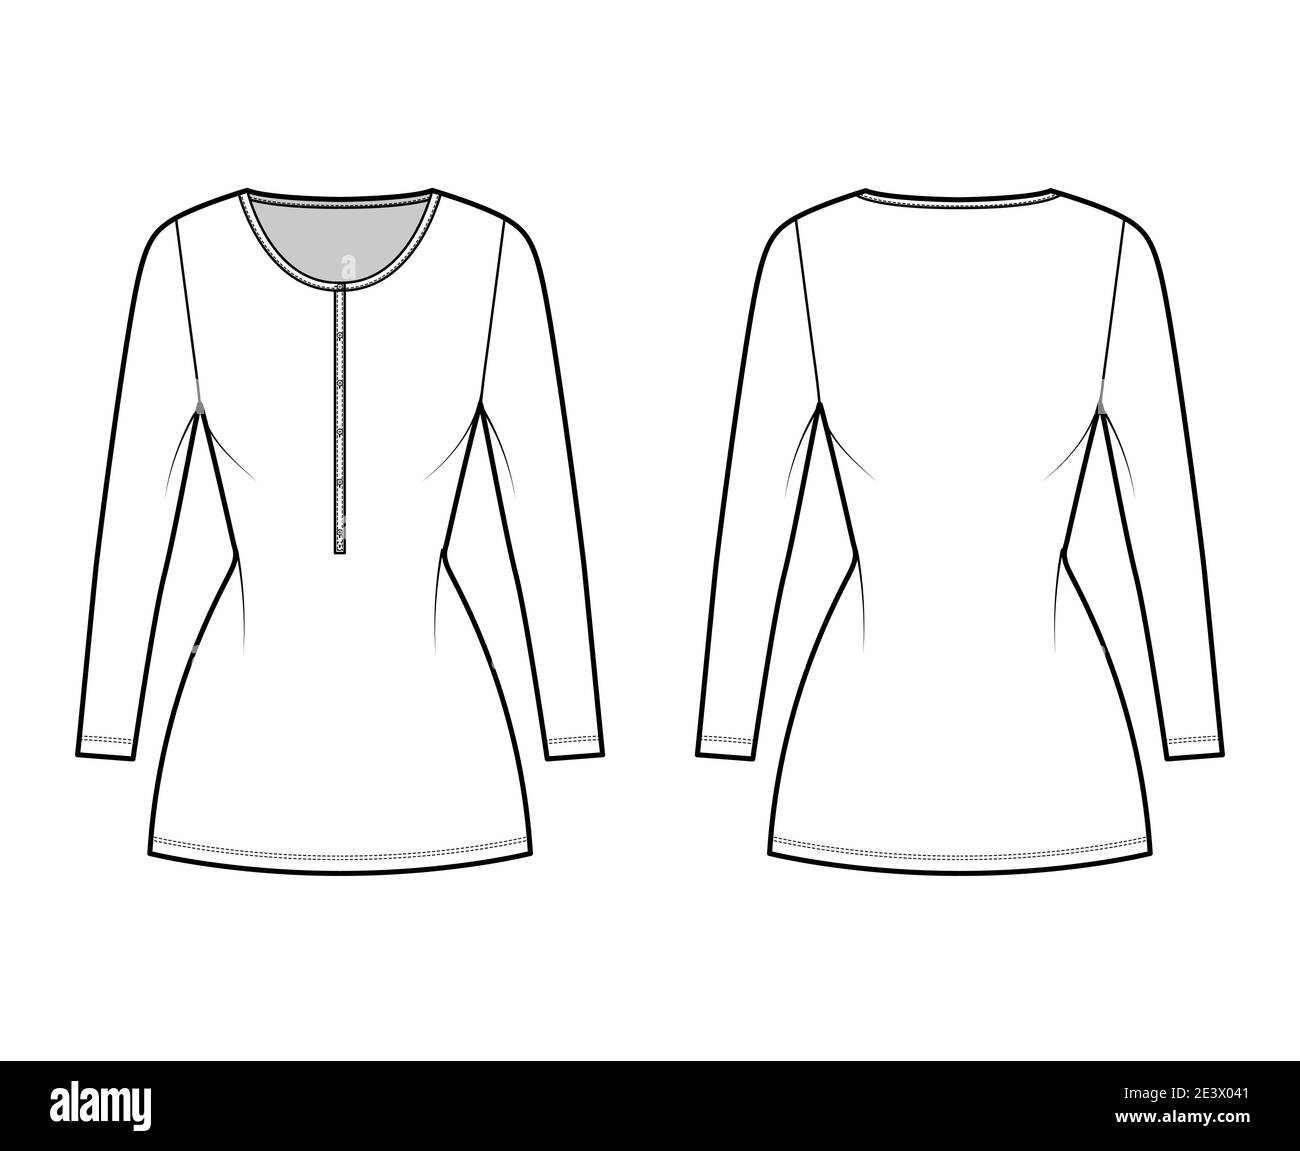 Shirt dress mini technical fashion illustration with henley neck, long sleeves, fitted body, Pencil fullness, stretch jersey. Flat apparel template front, back, white color. Women, men, CAD mockup Stock Vector